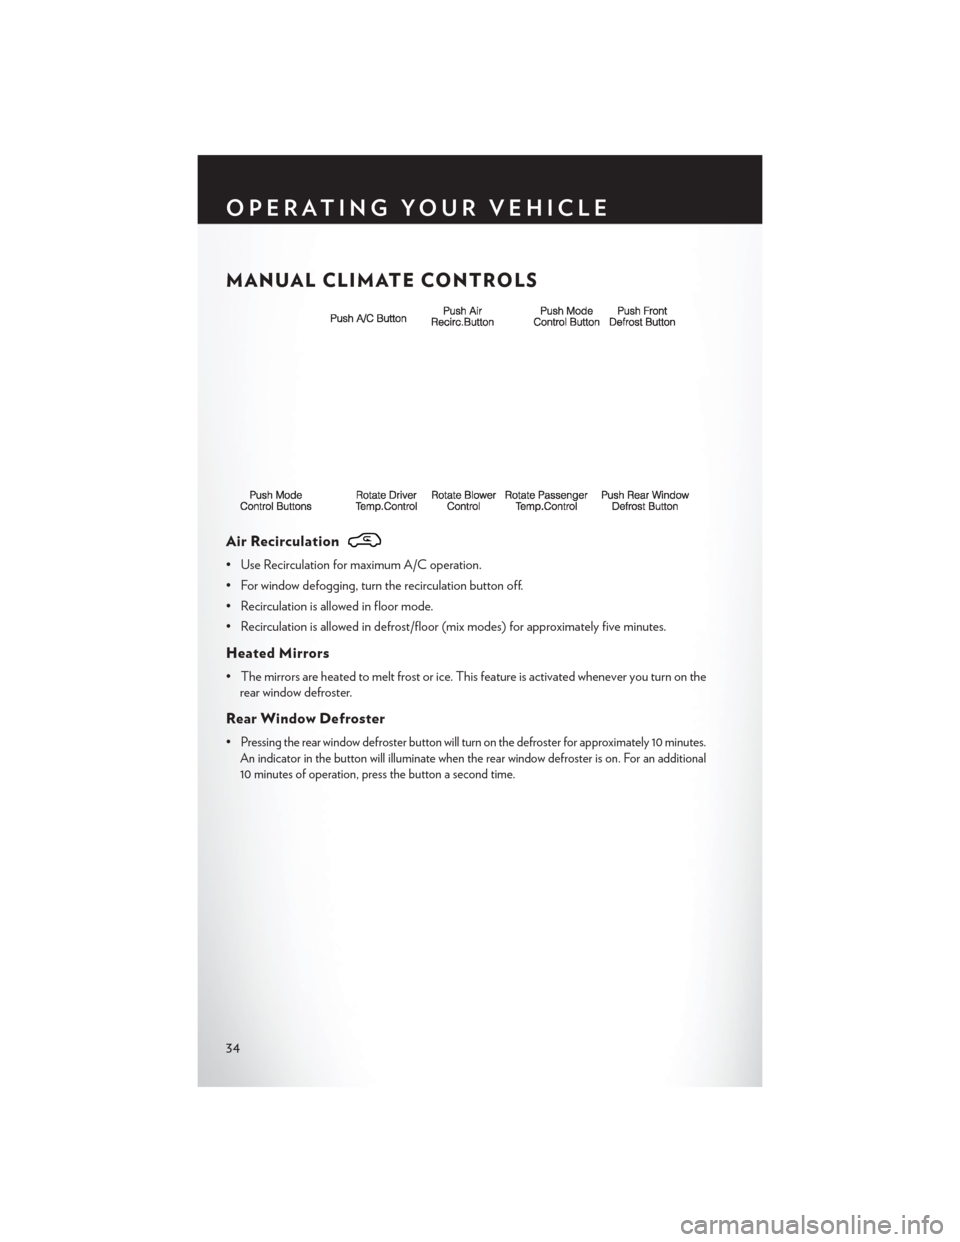 CHRYSLER TOWN AND COUNTRY 2013 5.G Owners Guide MANUAL CLIMATE CONTROLS
Air Recirculation
• Use Recirculation for maximum A/C operation.
• For window defogging, turn the recirculation button off.
• Recirculation is allowed in floor mode.
• 